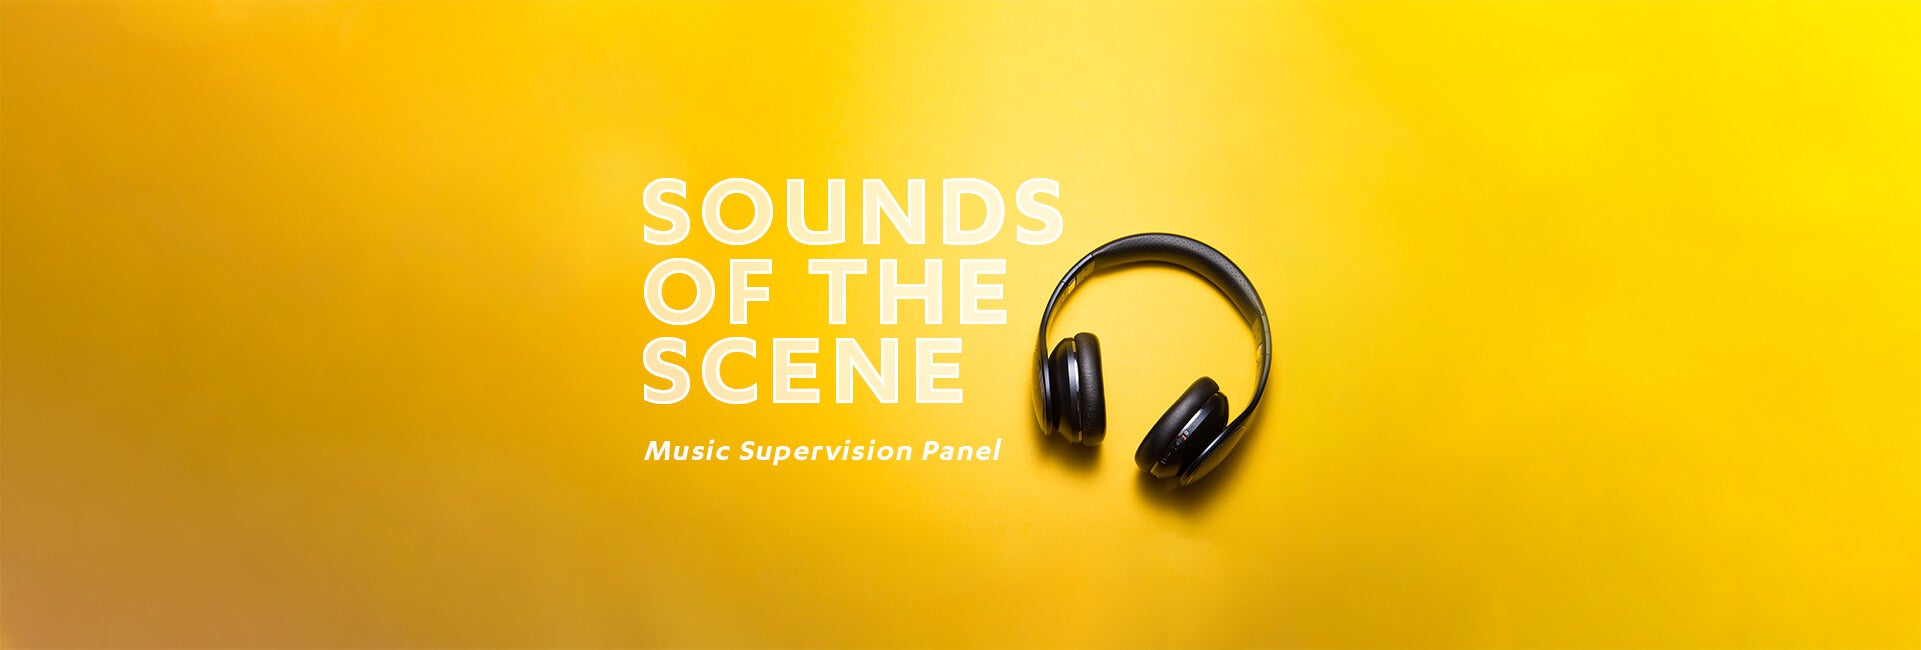 Sounds of the Scene Music Supervision Panel